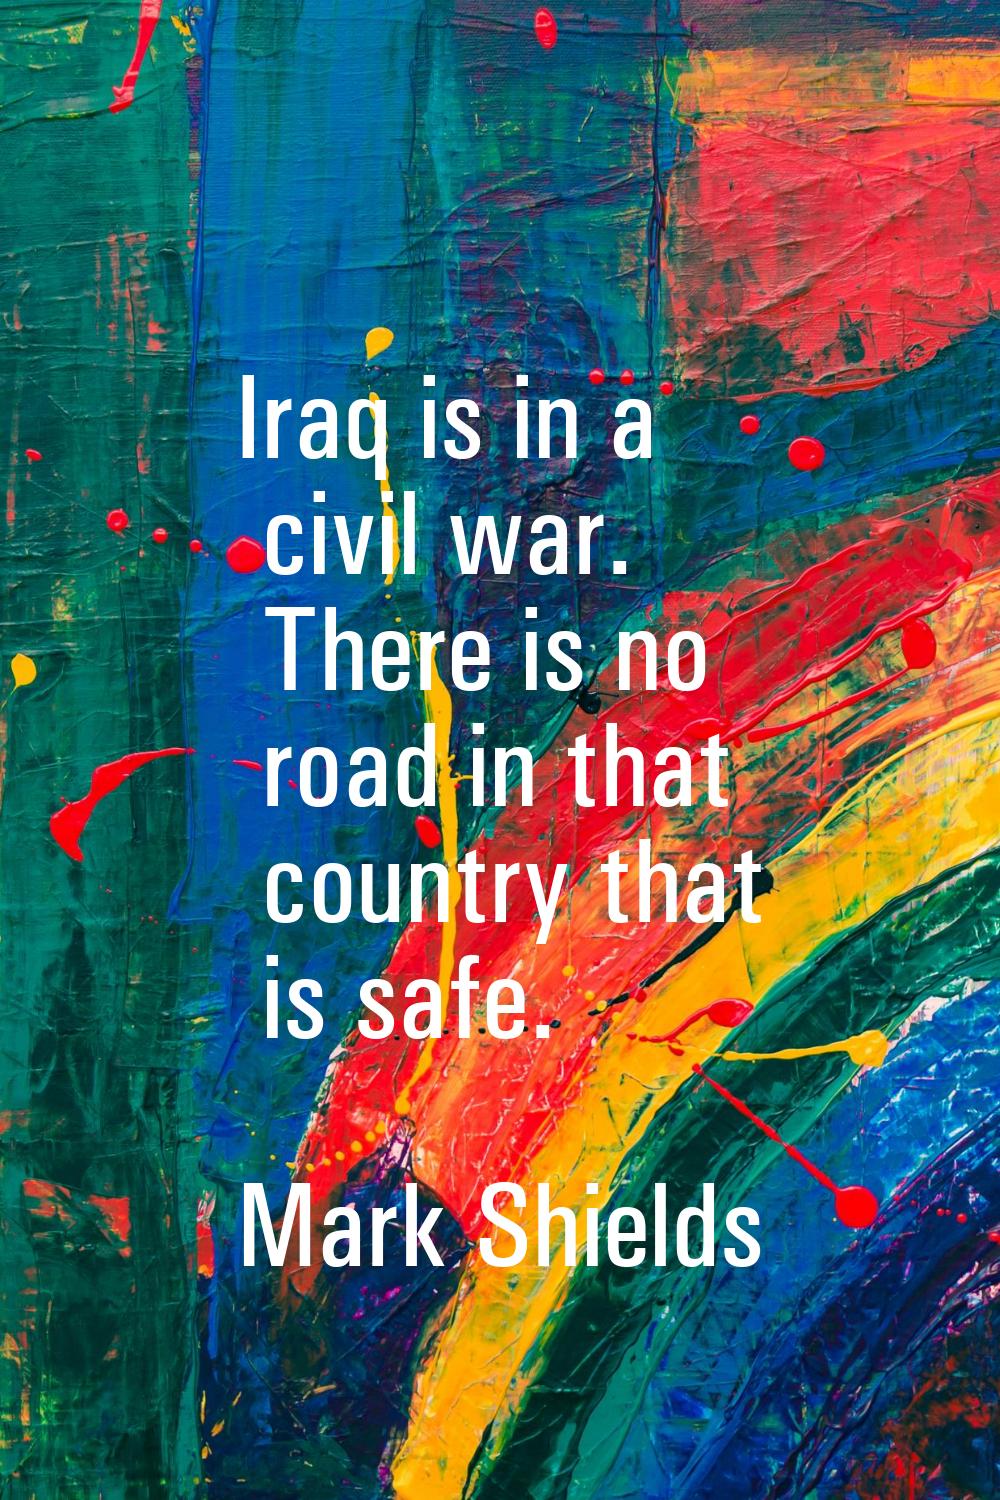 Iraq is in a civil war. There is no road in that country that is safe.